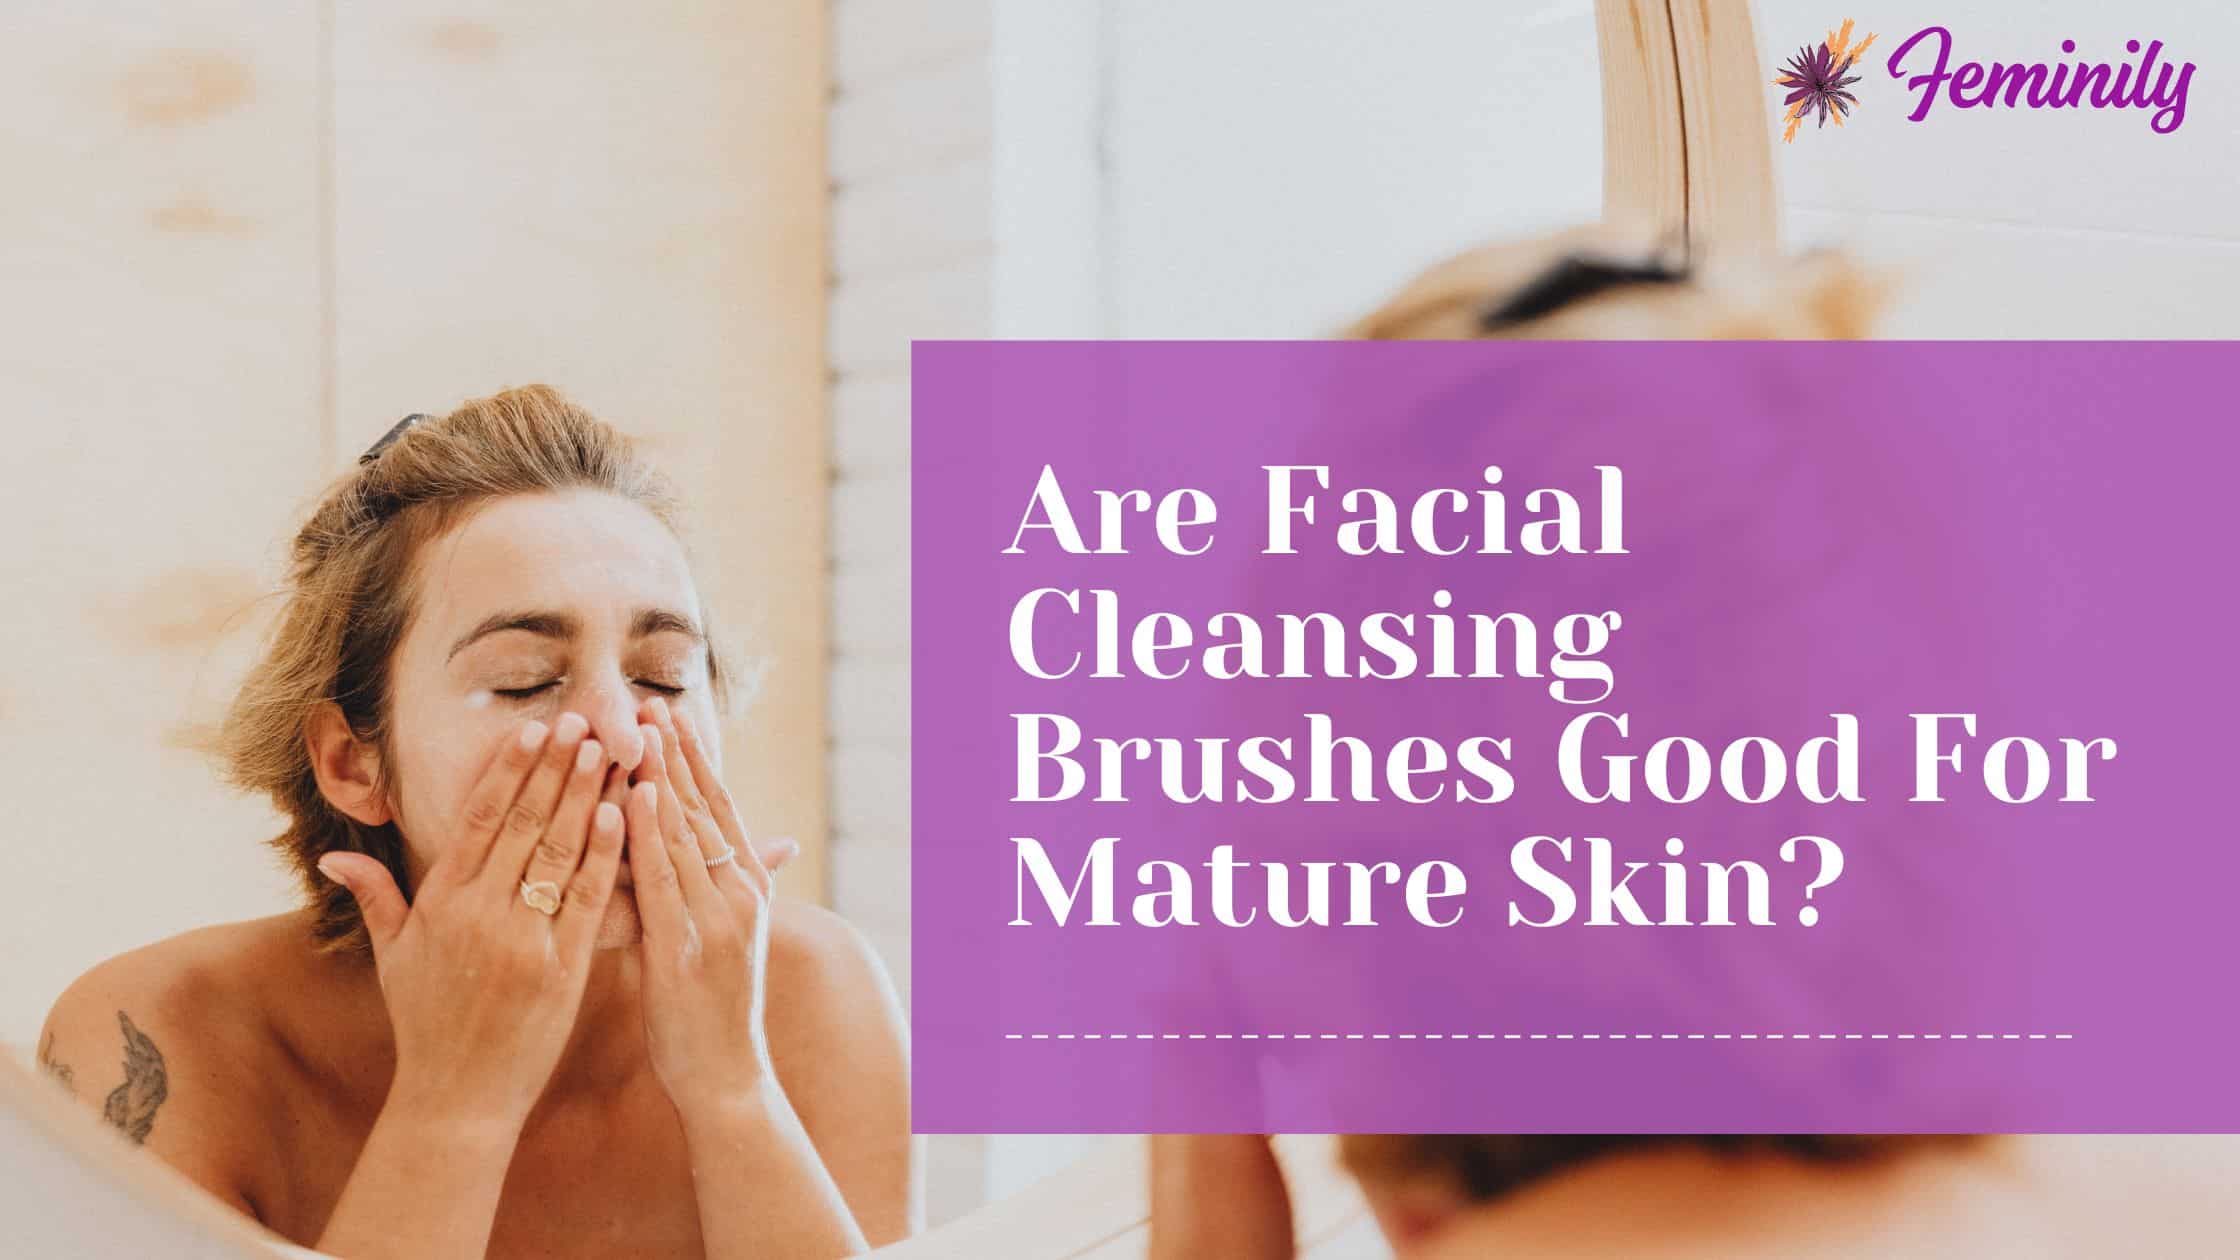 Are facial cleansing brushes good for mature skin